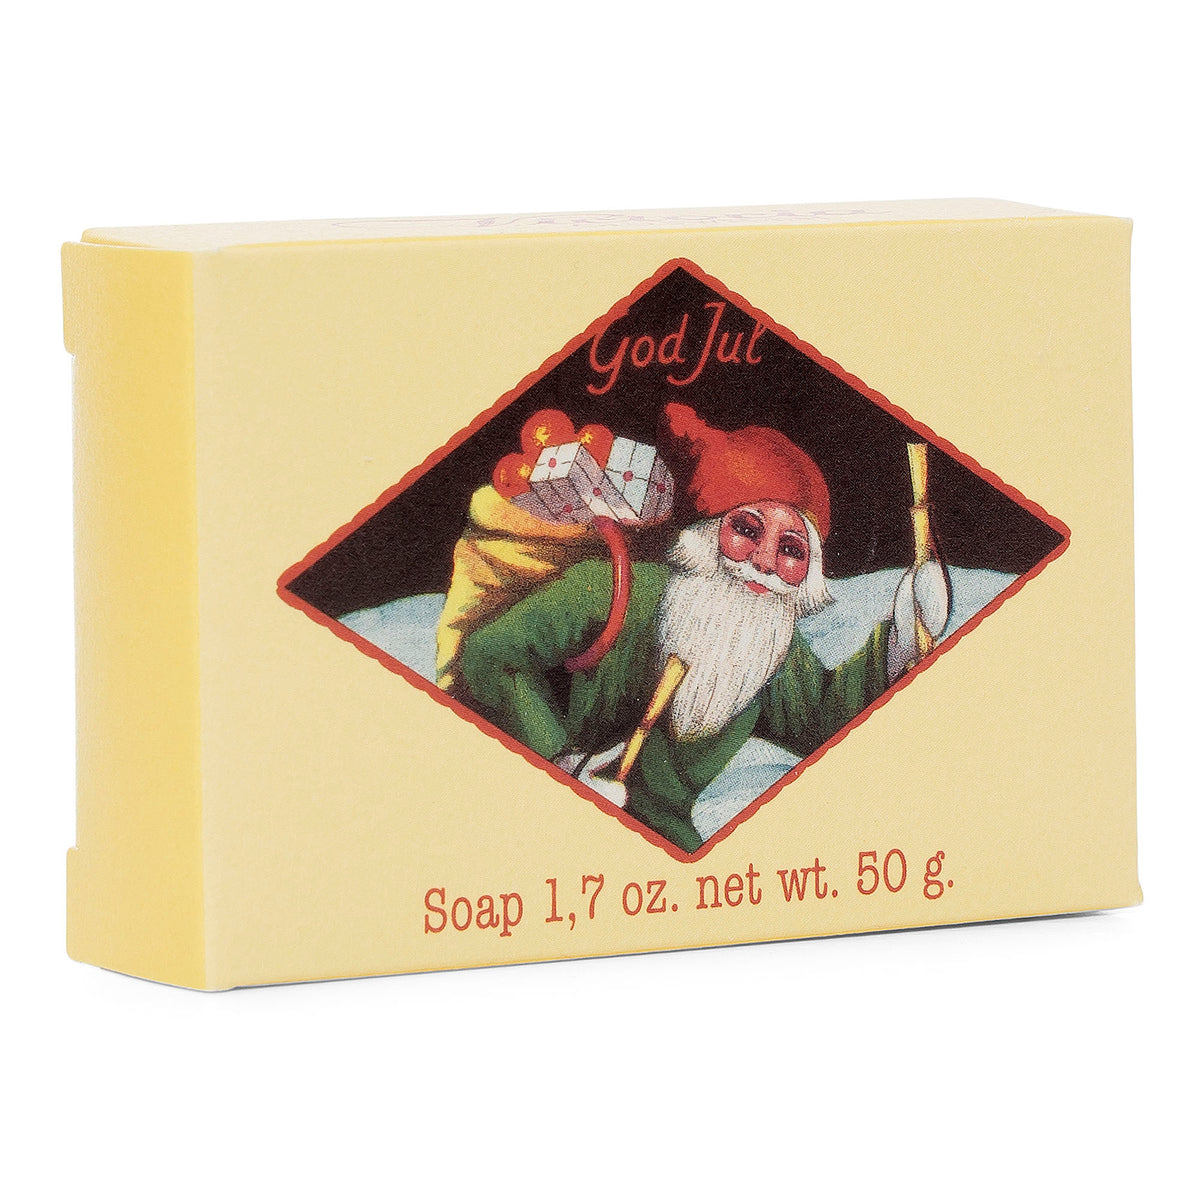 A vintage yellow scented soap box featuring an illustration of Santa Claus with a sack of gifts and a candle, labeled "God Jul" on a diamond-shaped background - Victoria Scandinavian Merry Christmas Soap - Elf with Presents by Victloria Scandinavian Soaps.